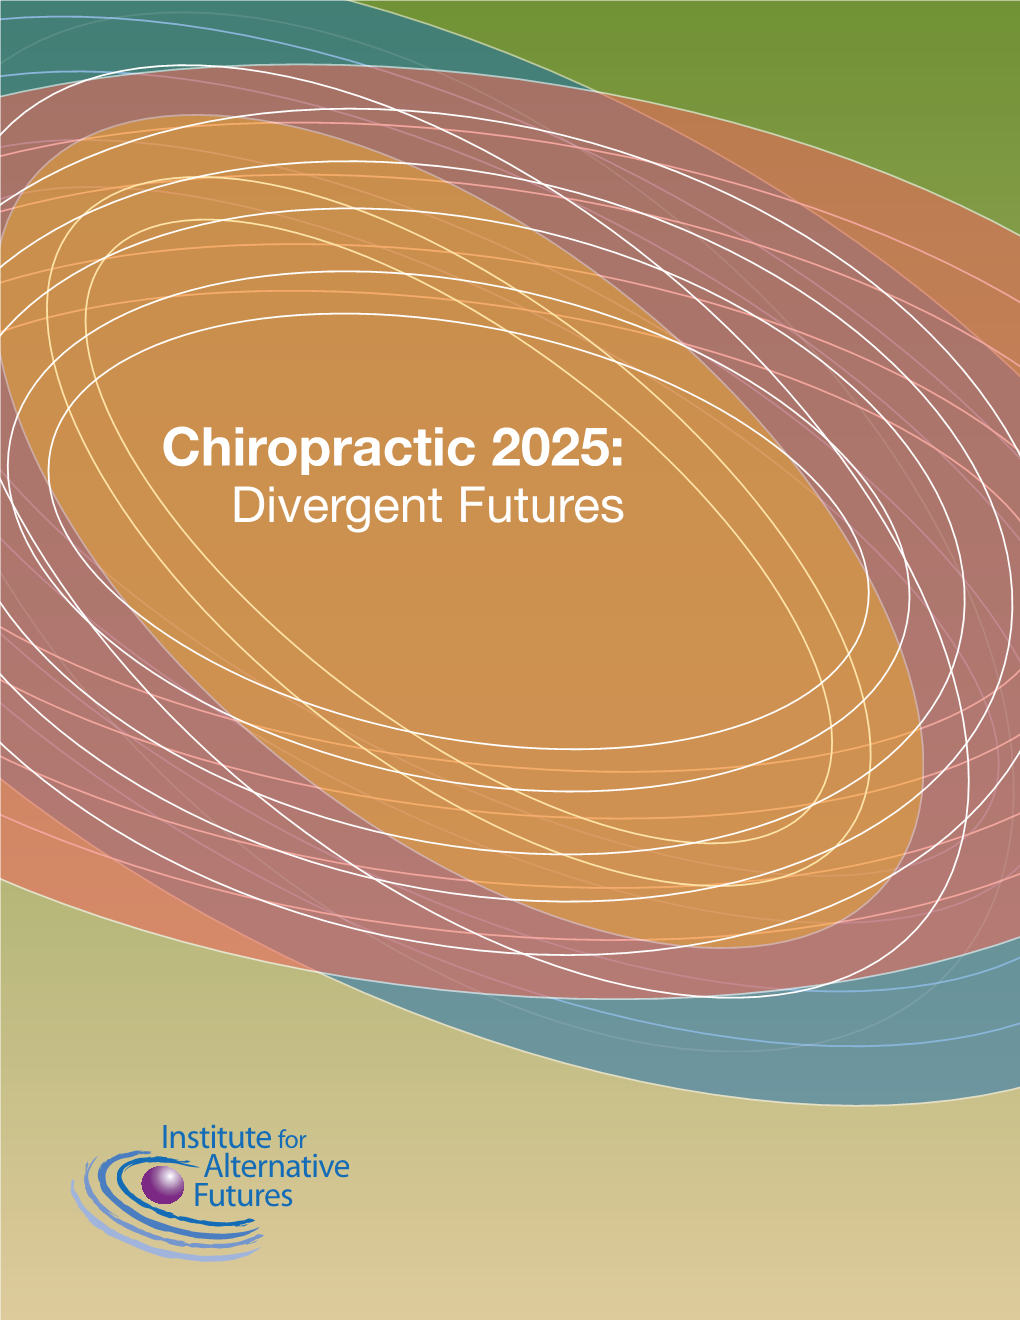 Chiropractic 2025: Divergent Futures Chiropractic 2025: Divergent Futures Was Made Possible by Funding from the NCMIC Foundation